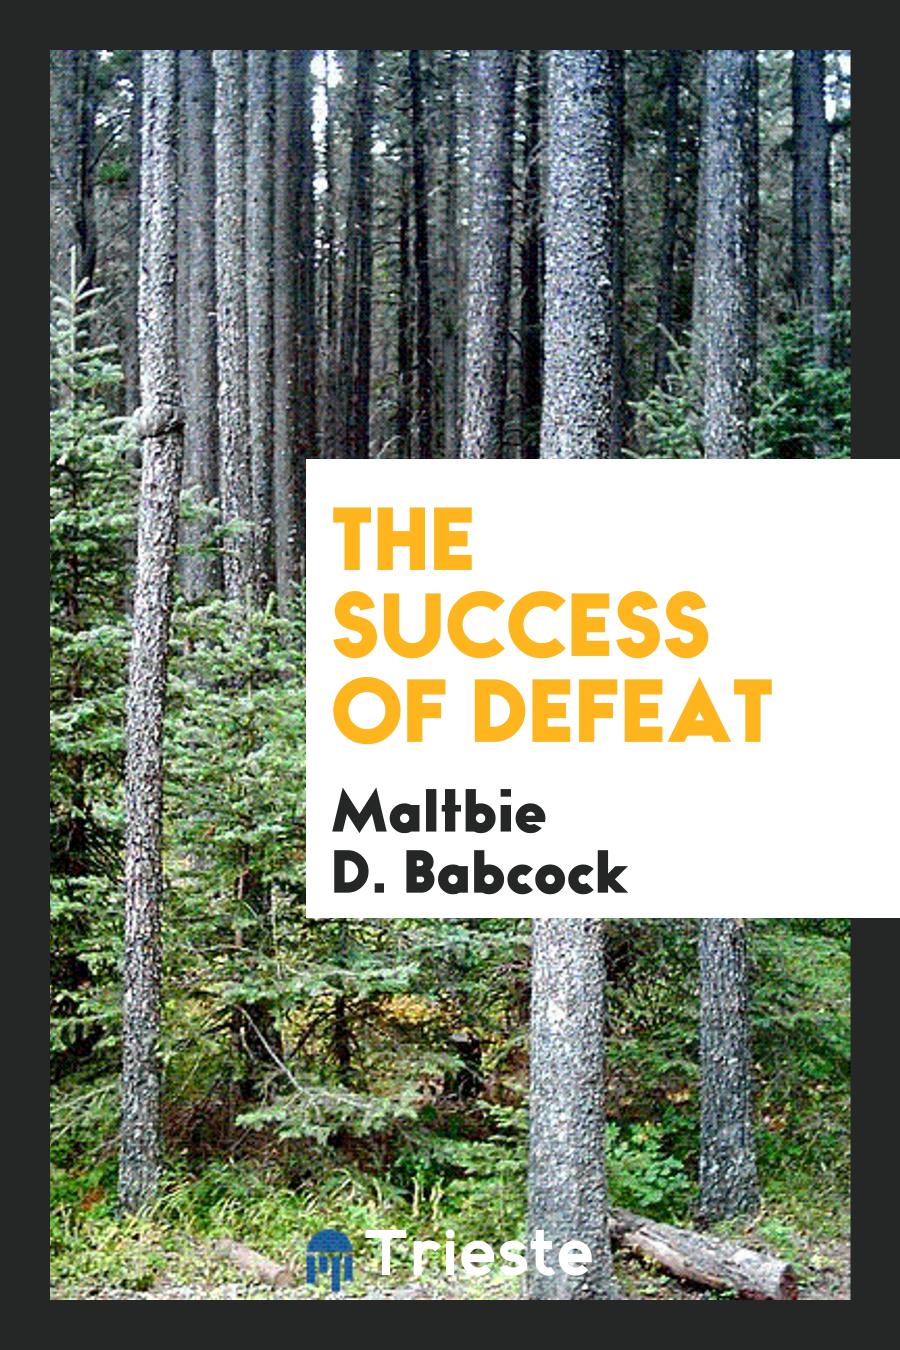 The success of defeat